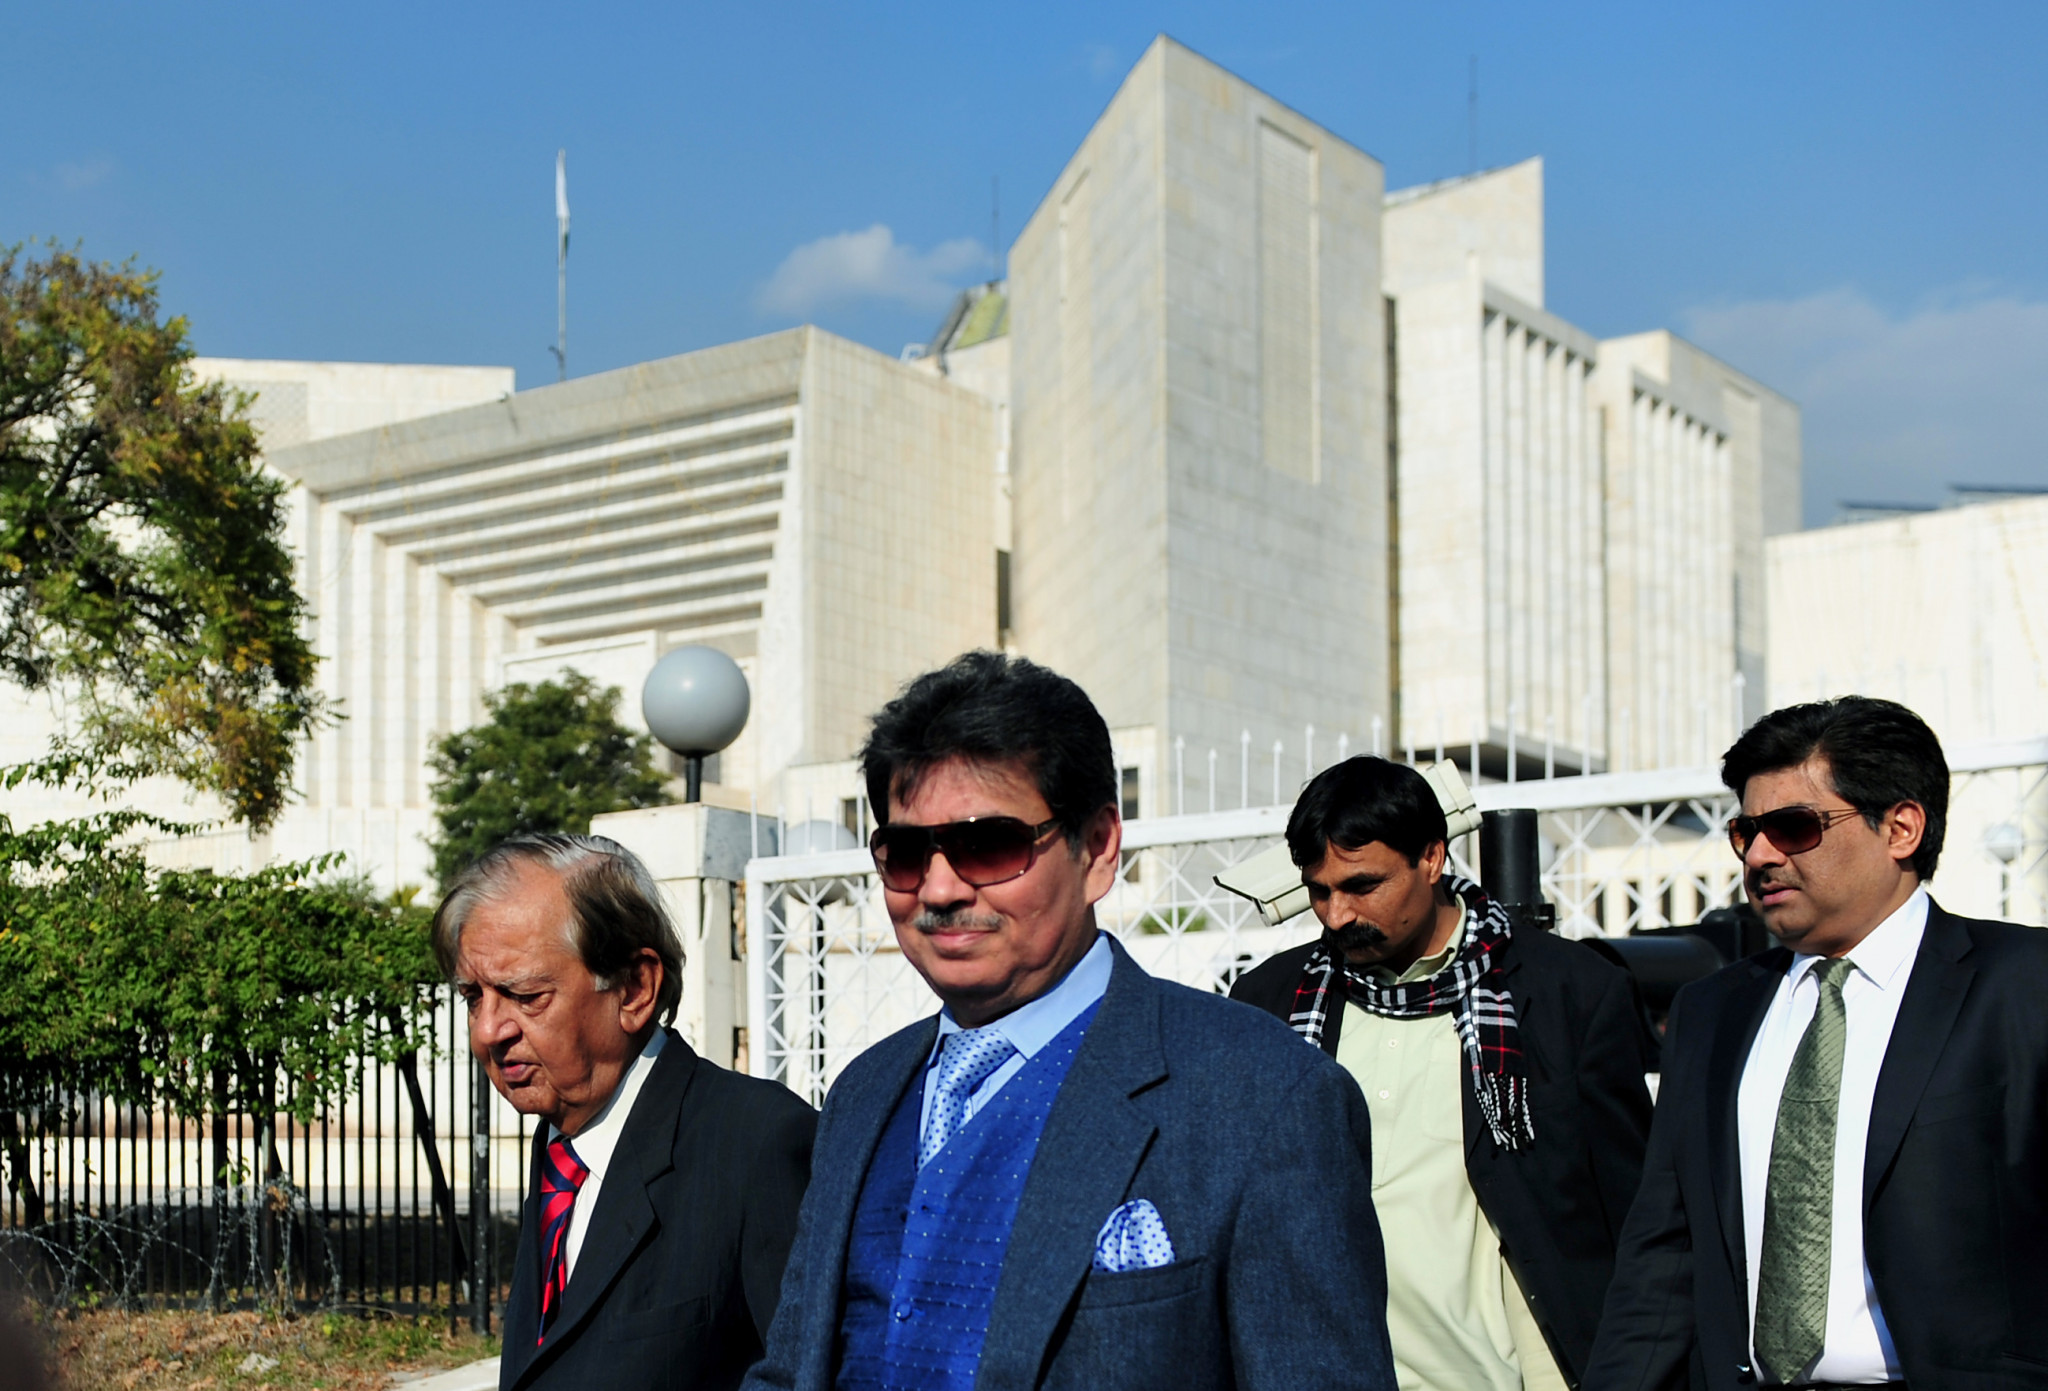 The PFF is led by Faisal Saleh Hayat, centre ©Getty Images